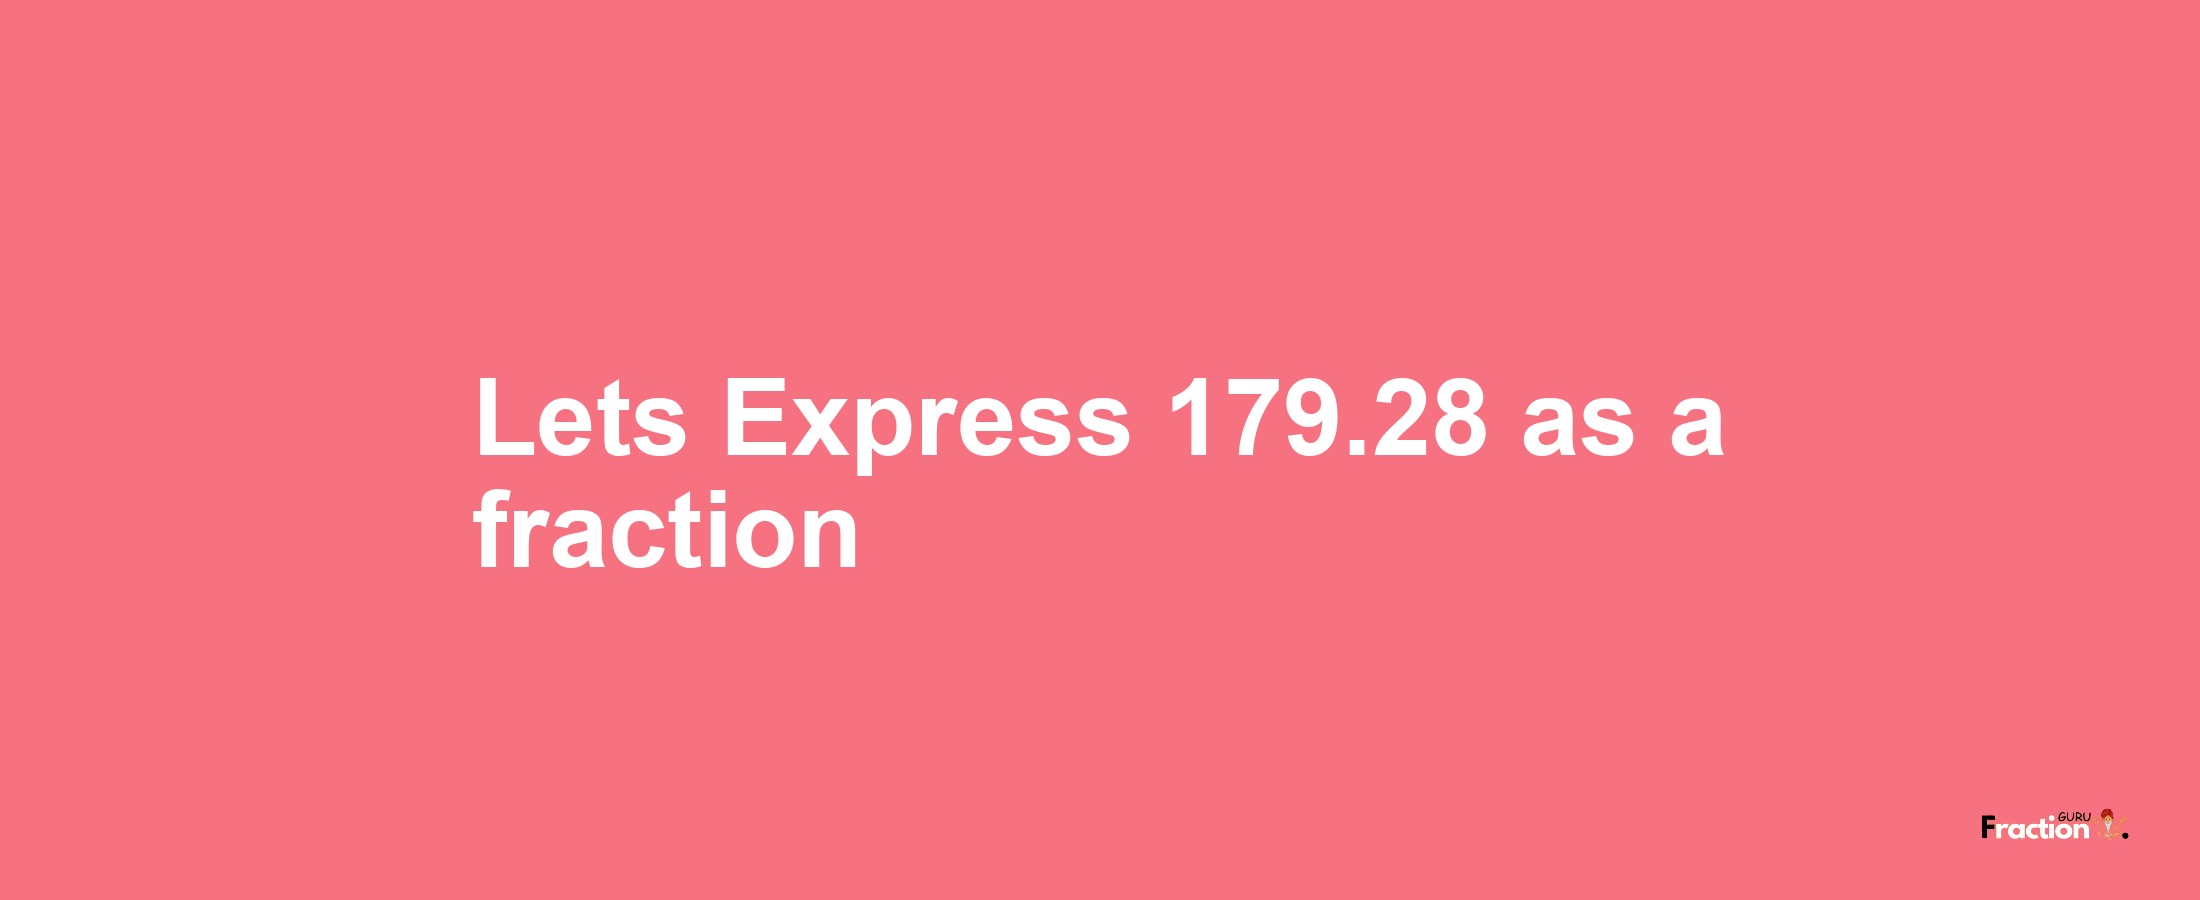 Lets Express 179.28 as afraction